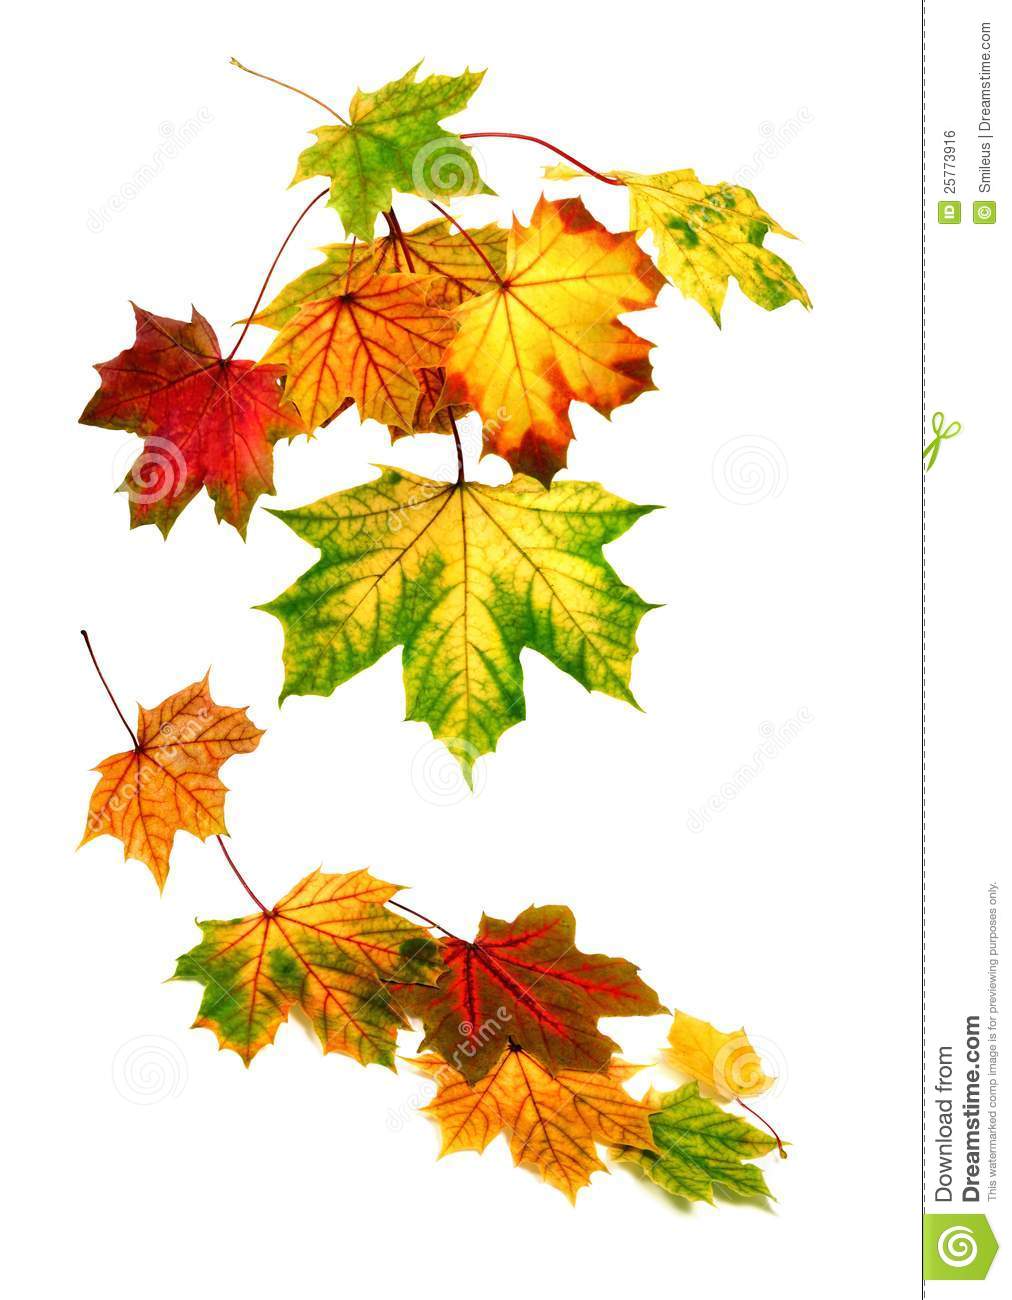 Colorful Autumn Leaves Falling Down Royalty Free Stock Image   Image    